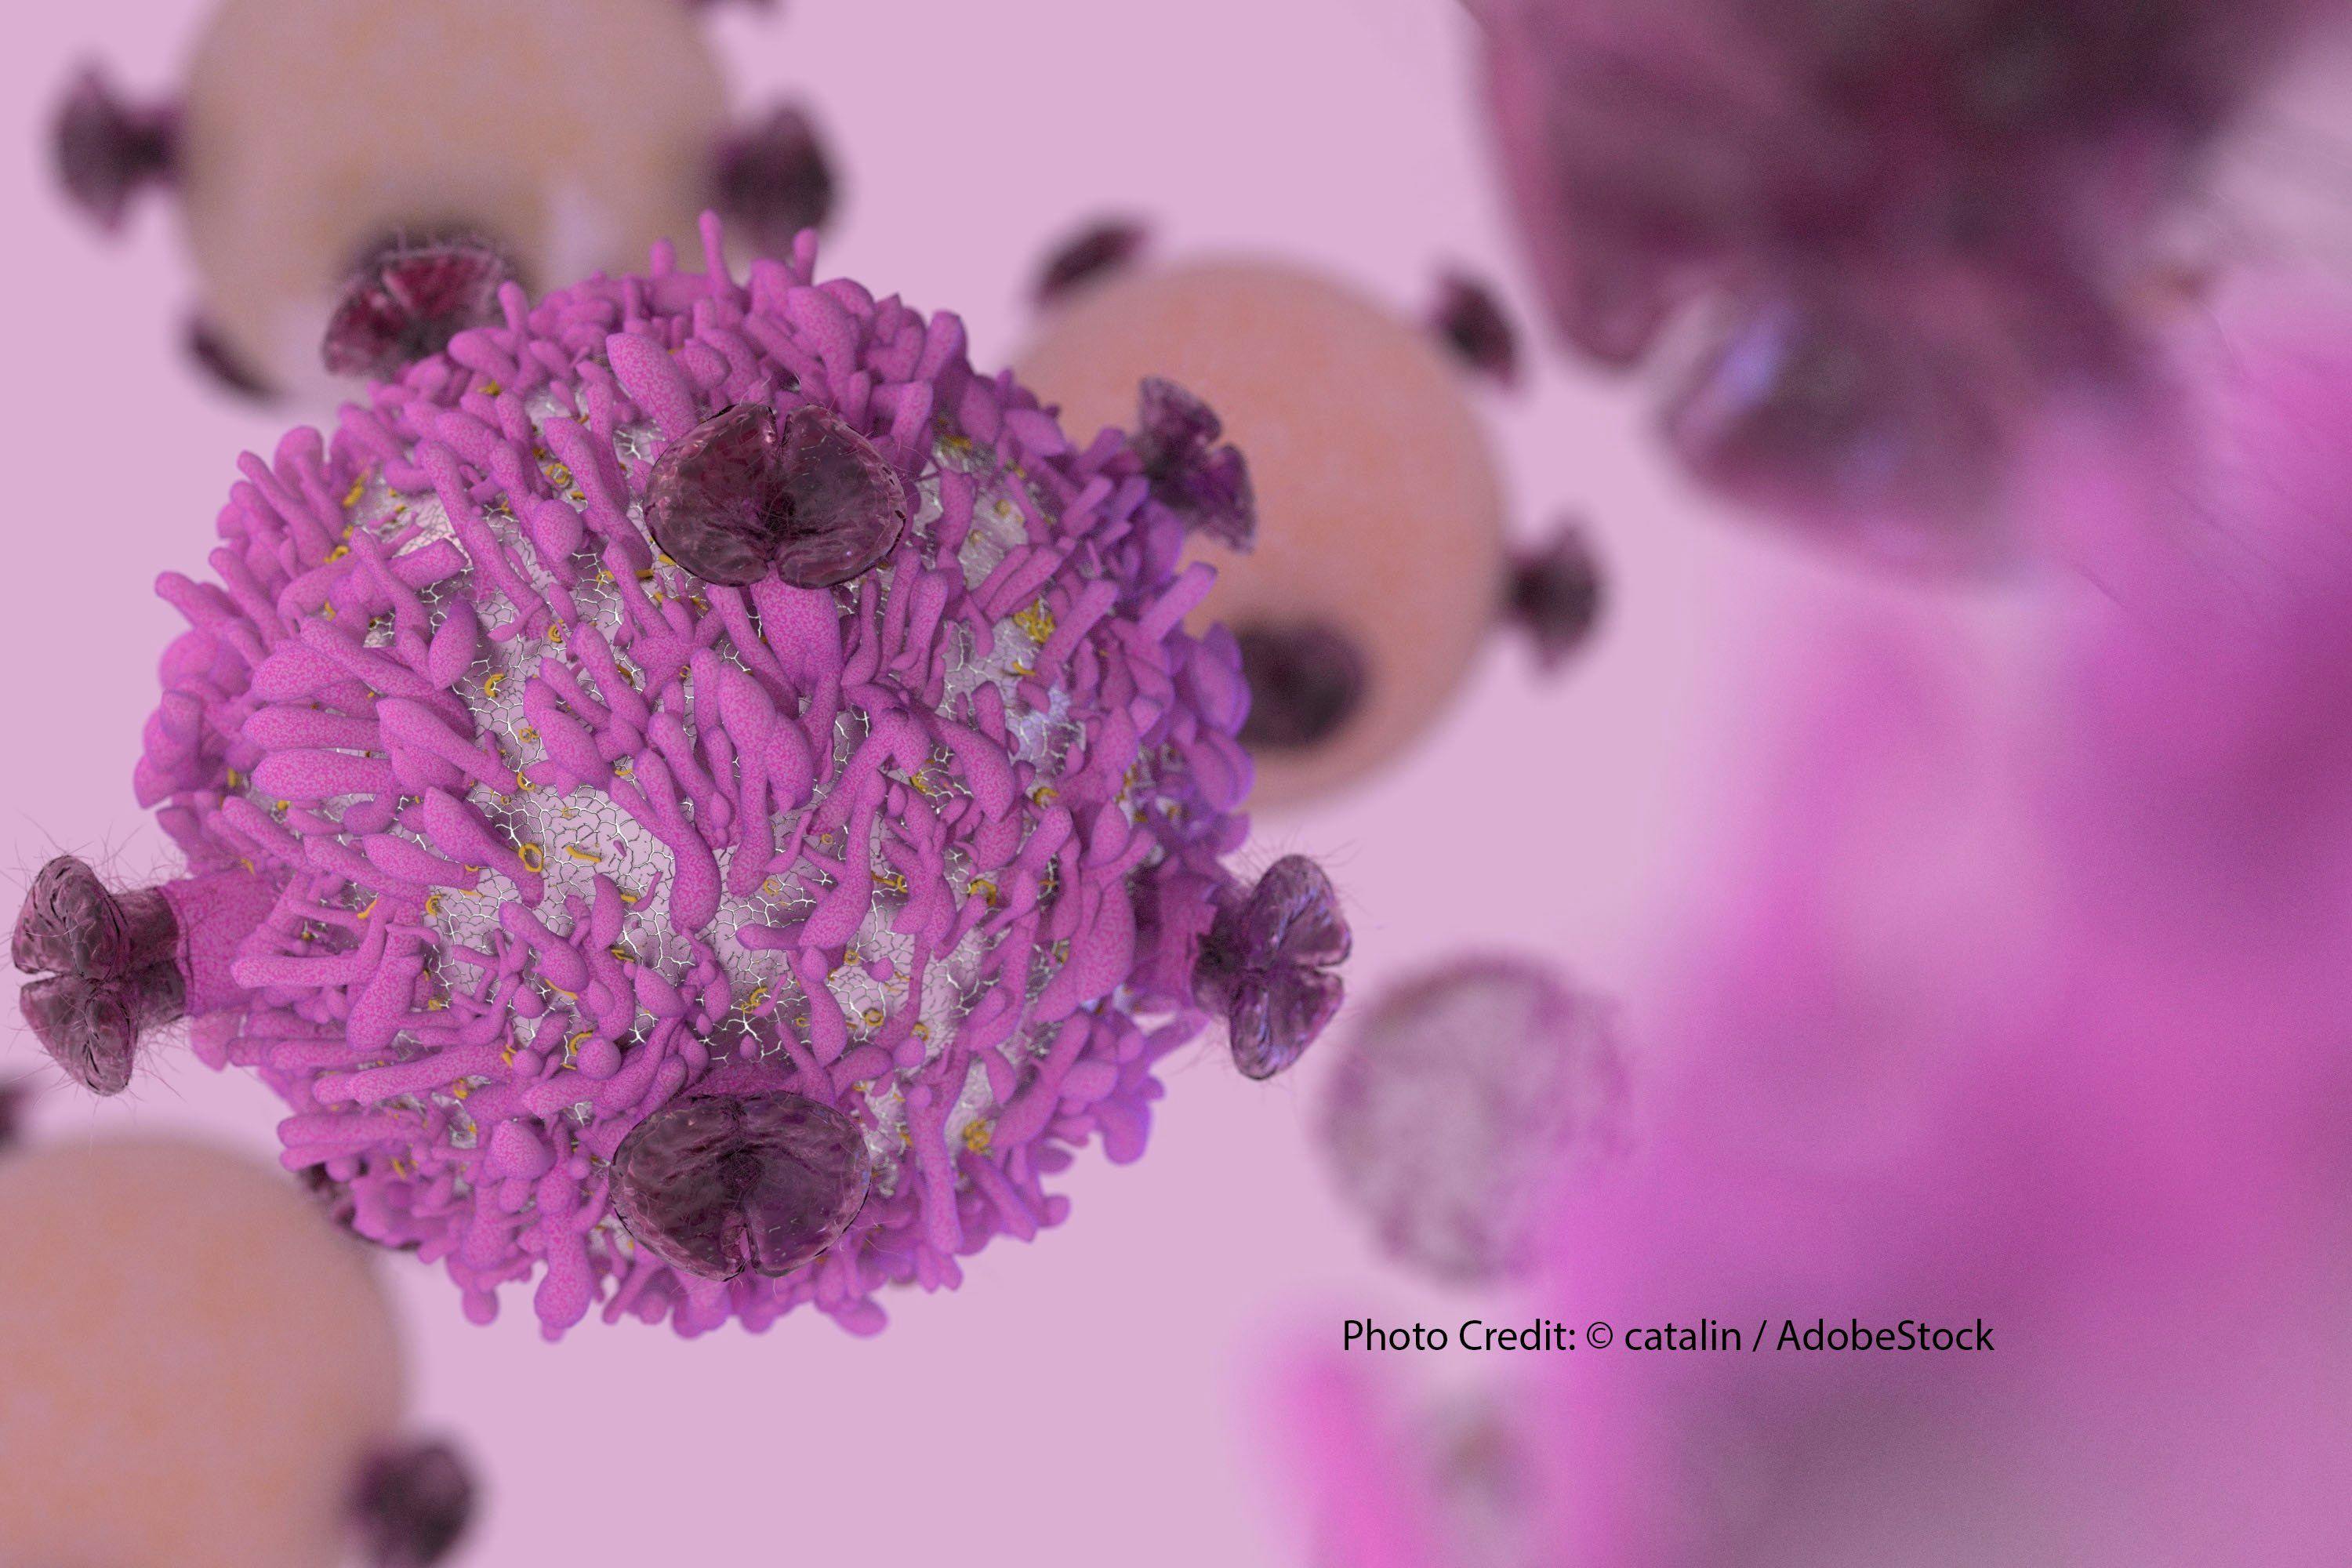 Model Can Predict Patient Outcomes to Immunotherapy, Engineer Proper Regimens